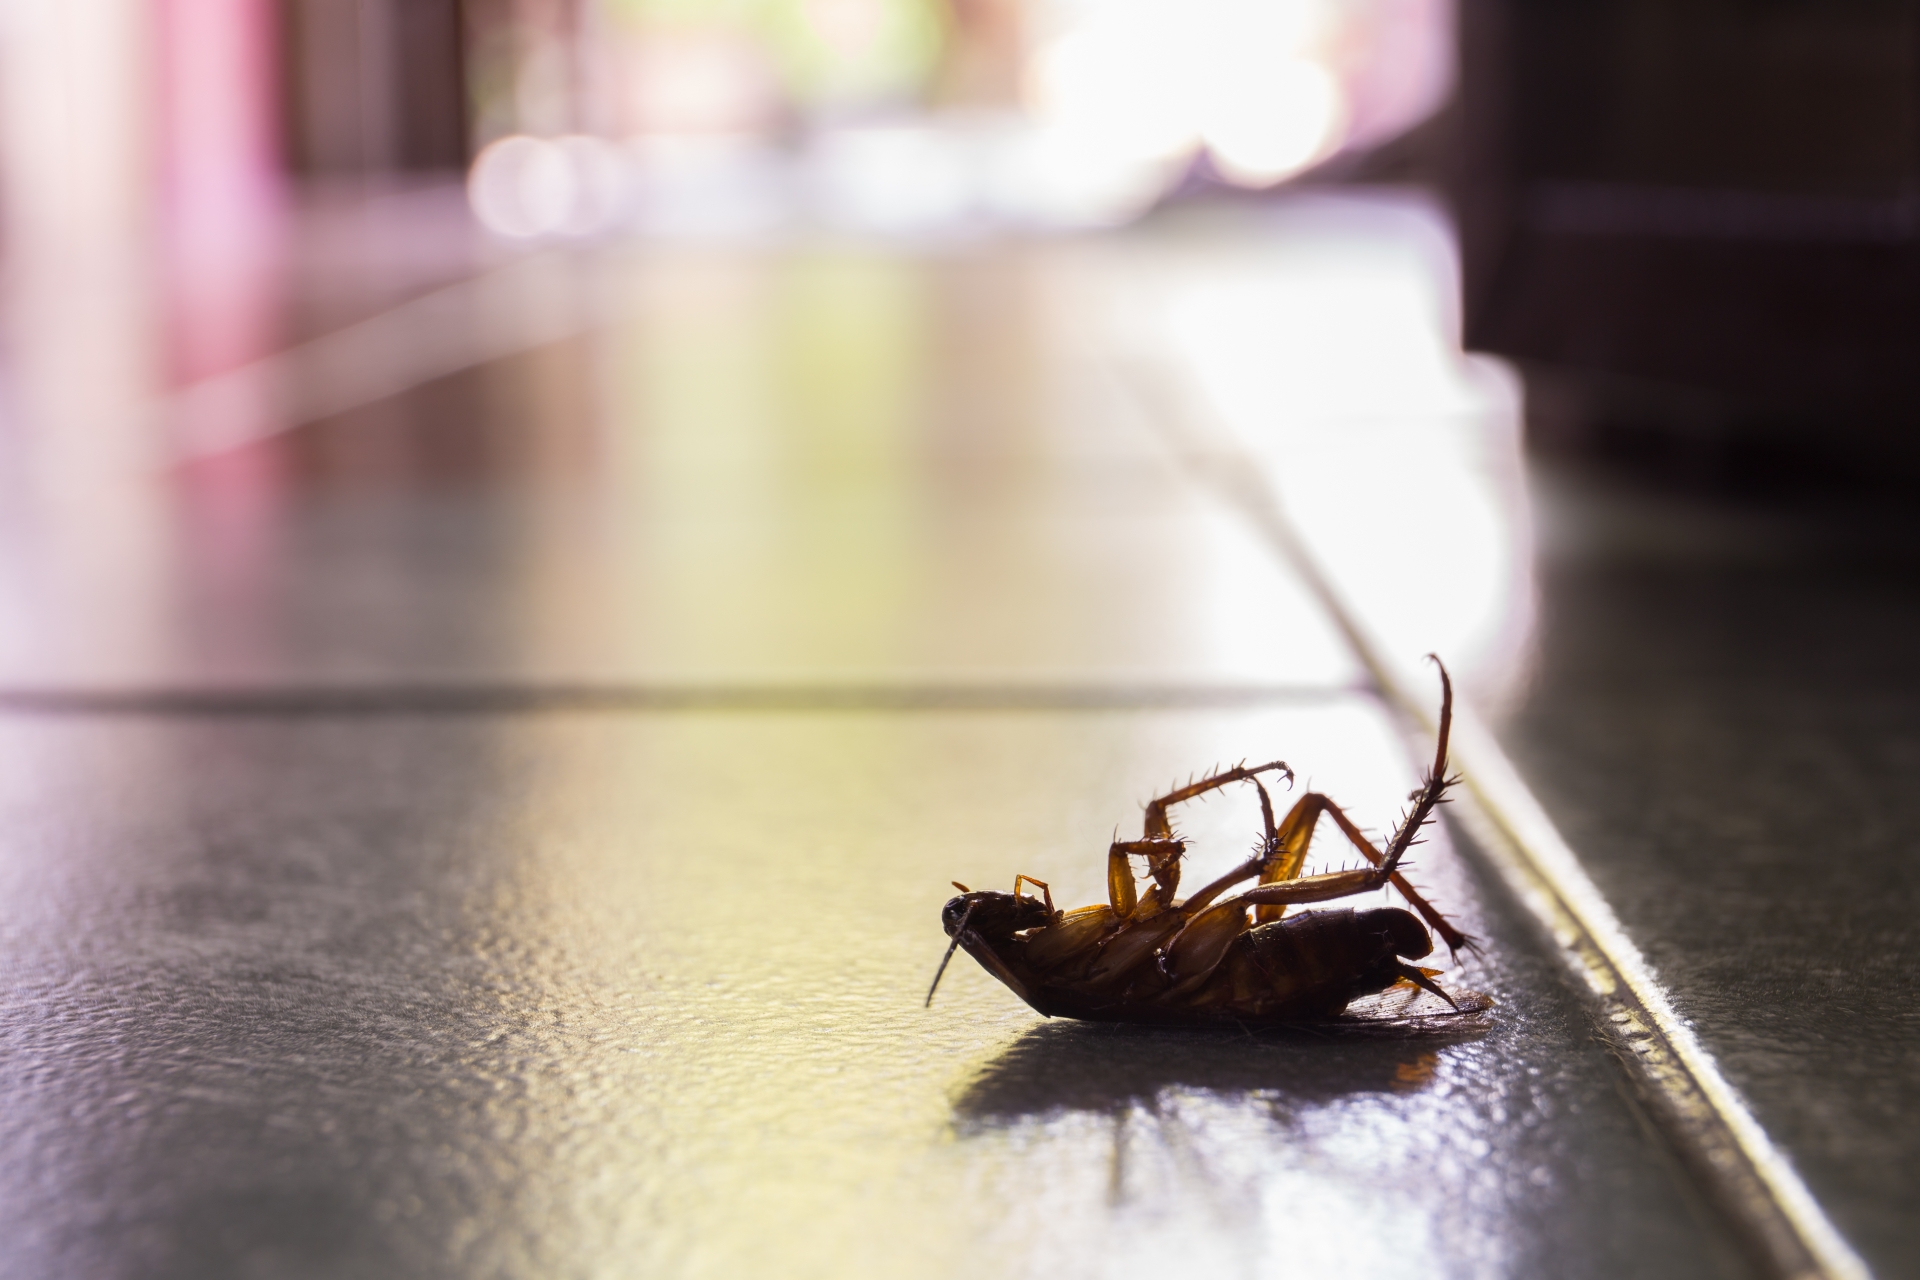 Cockroach Control, Pest Control in Penge, Anerley, SE20. Call Now 020 8166 9746